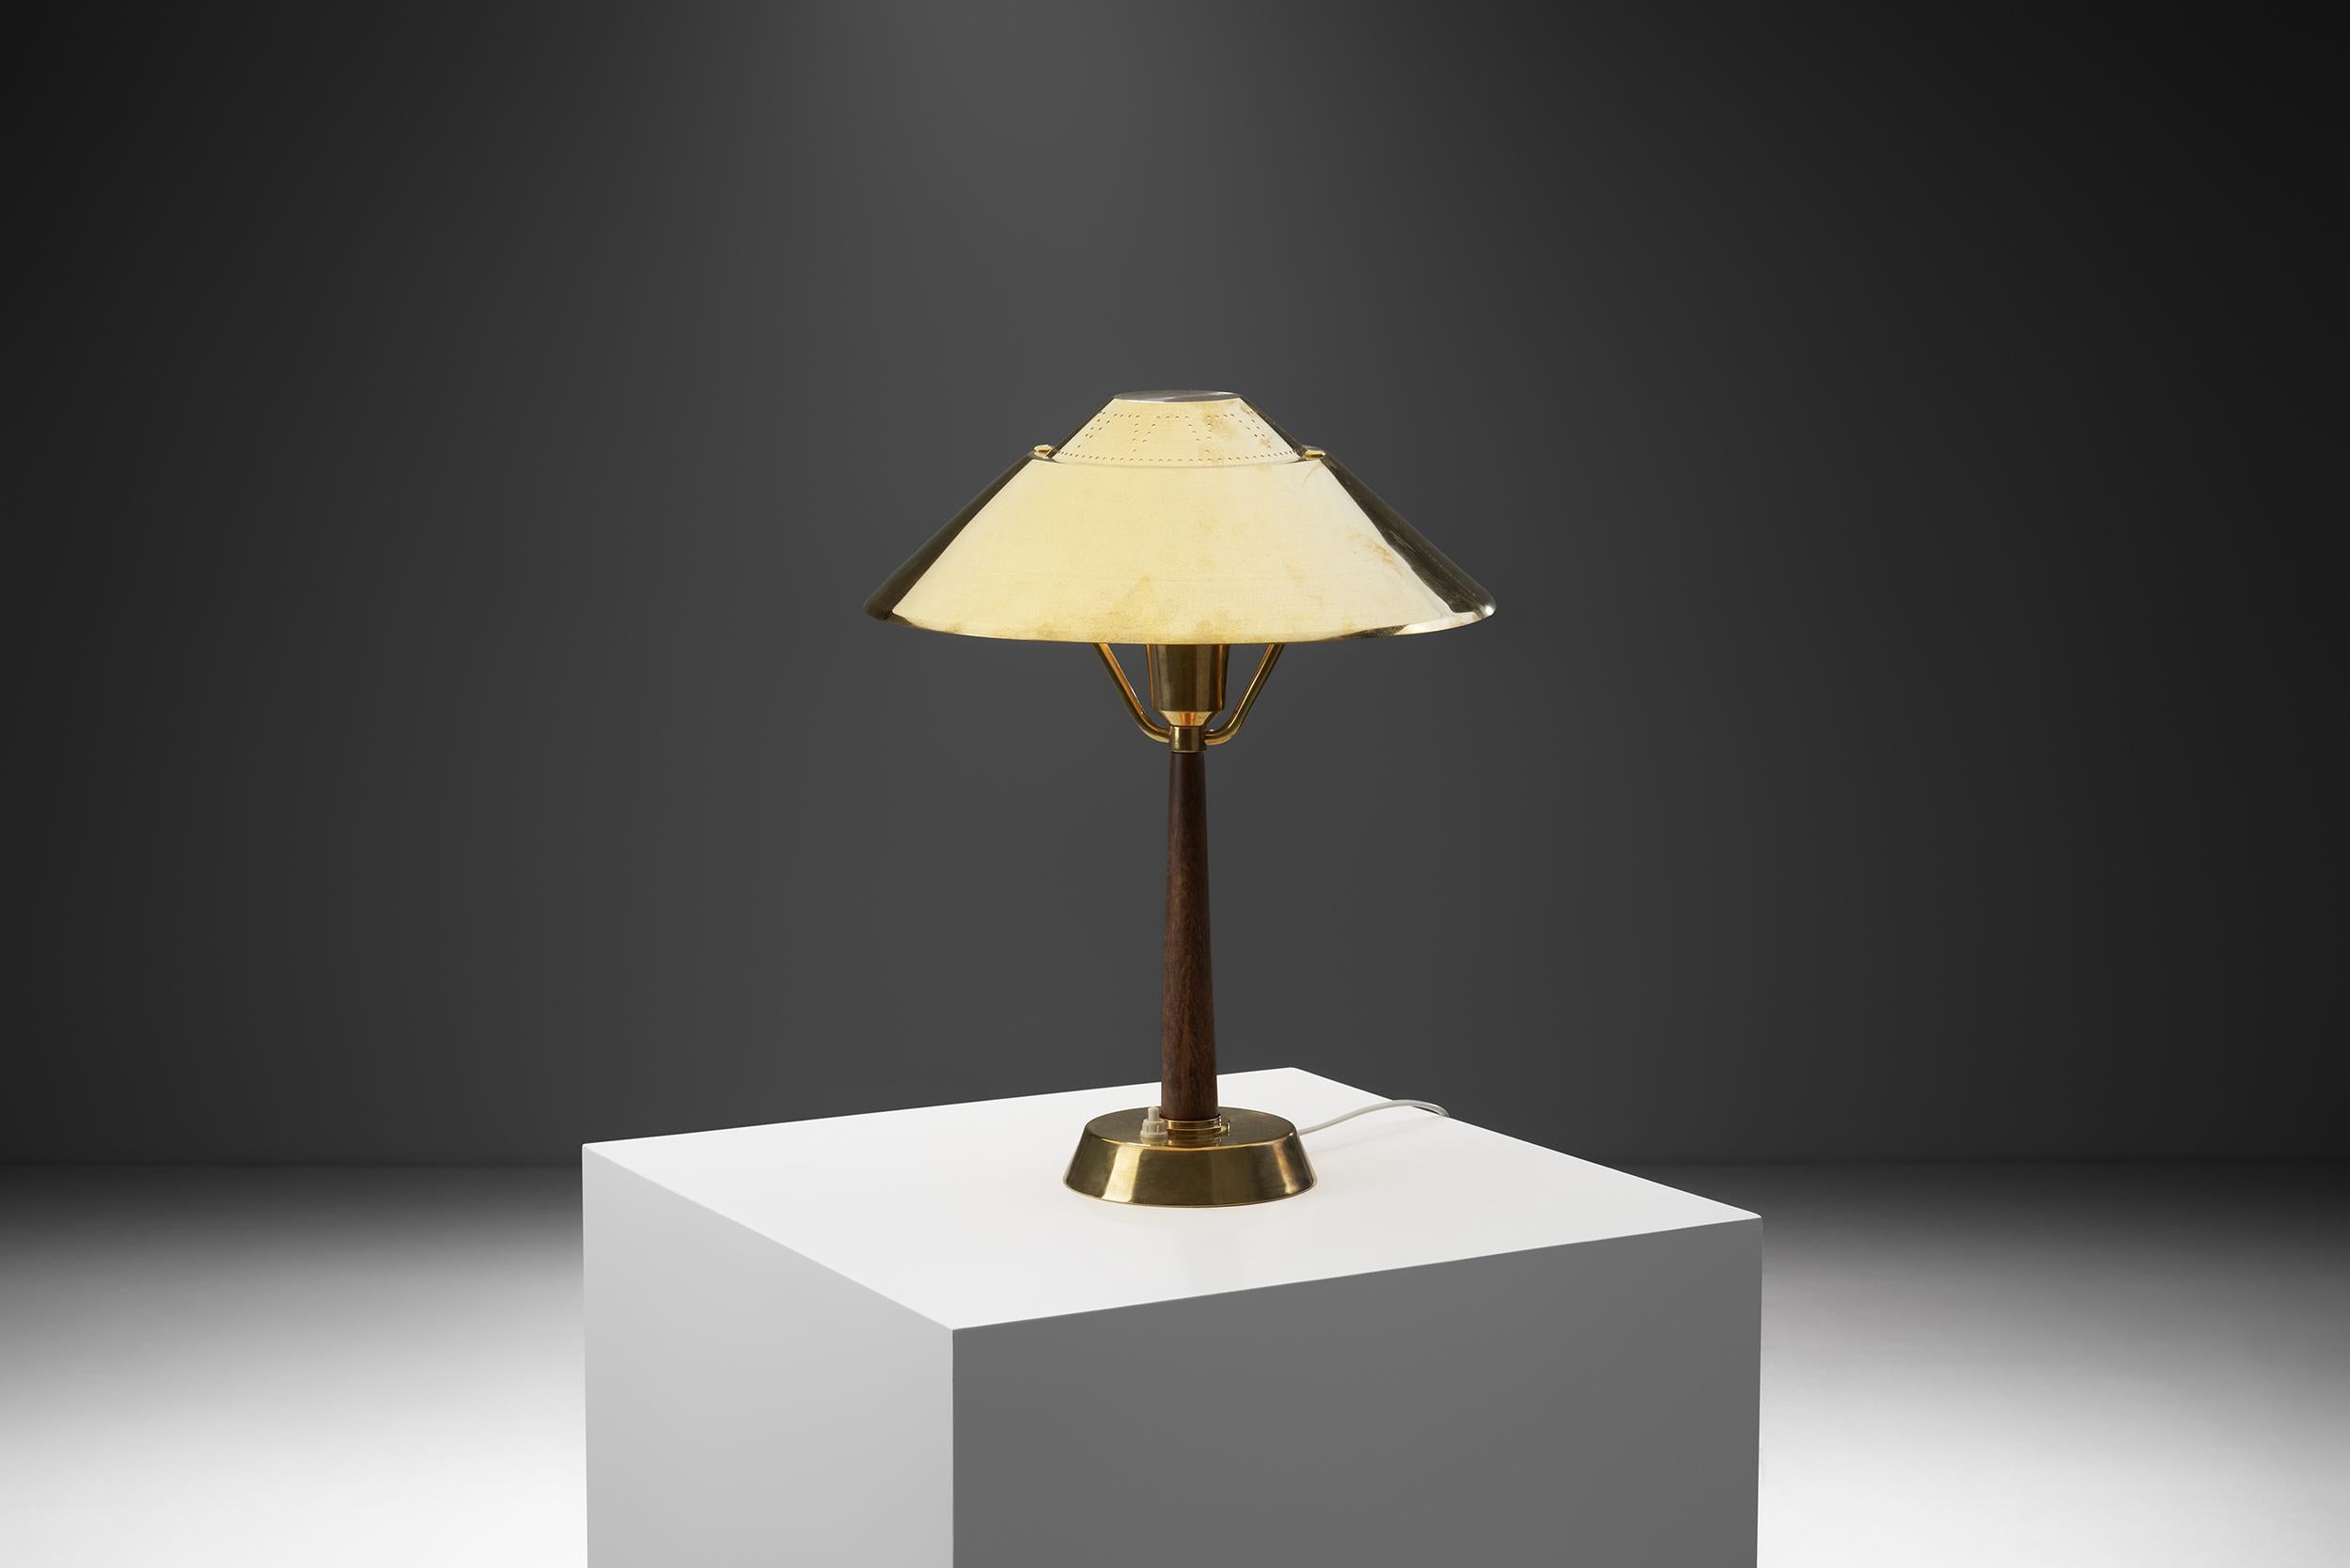 This stylish table lamp is a delightfully distinctive model, with unique details and material choices. Produced by AB E. Hansson & Co in Malmö, Sweden during the heyday of the mid-century modern movement, this rare model is just as stylish as it is